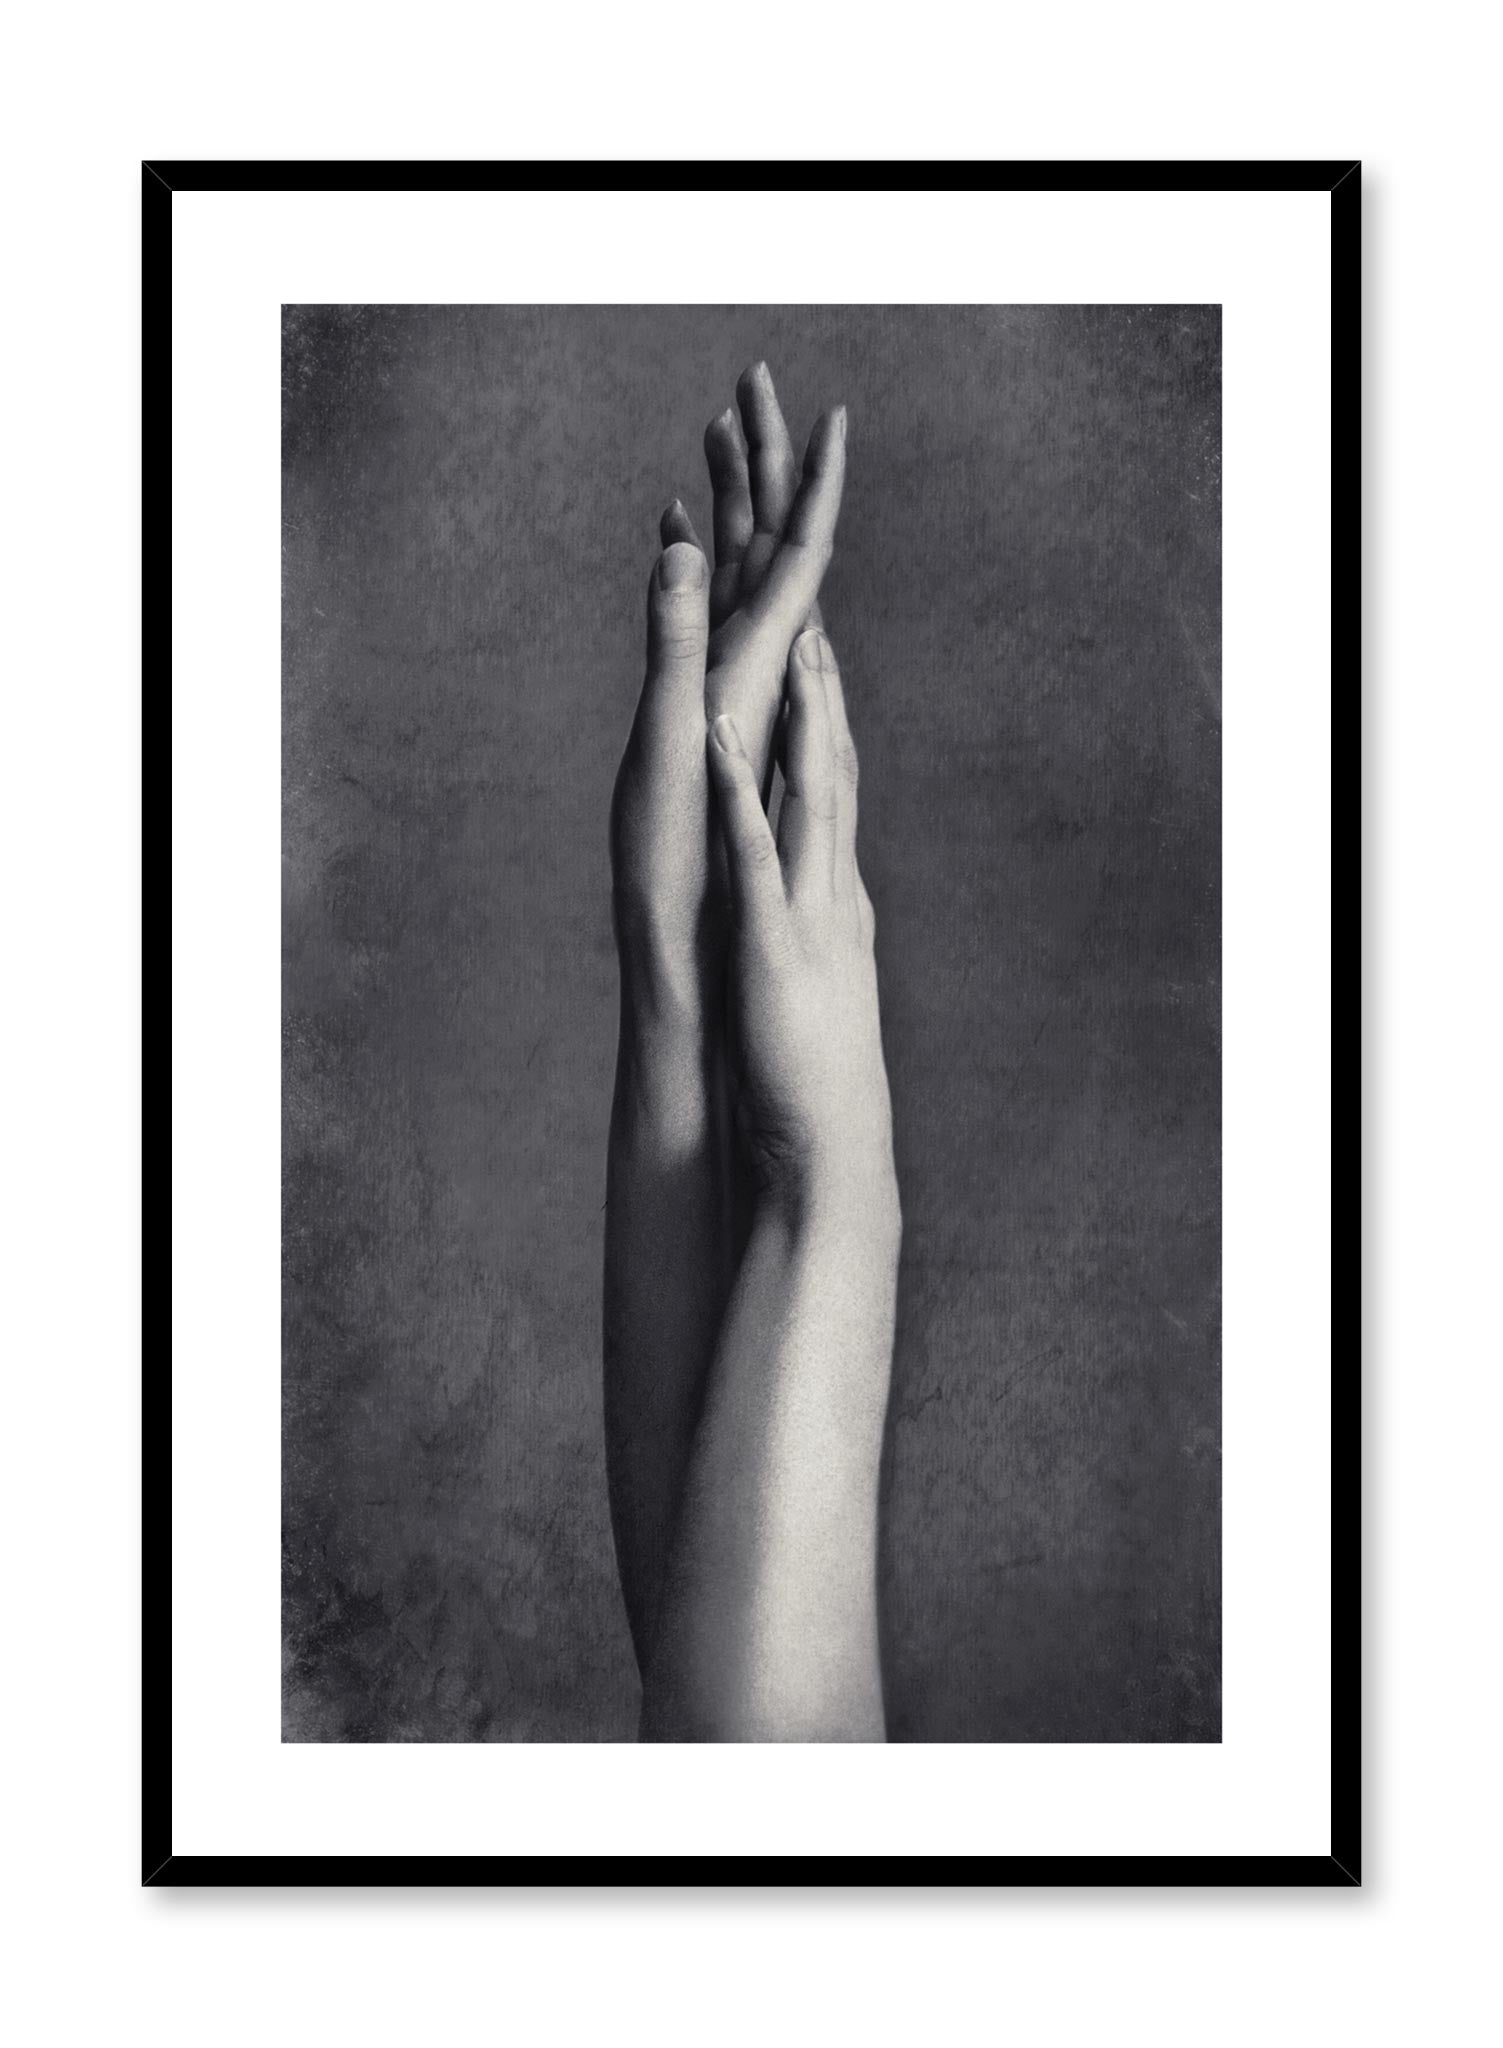 Minimalist design photography poster of black and white Hands by Love Warriors Creative Studio - Buy at Opposite Wall